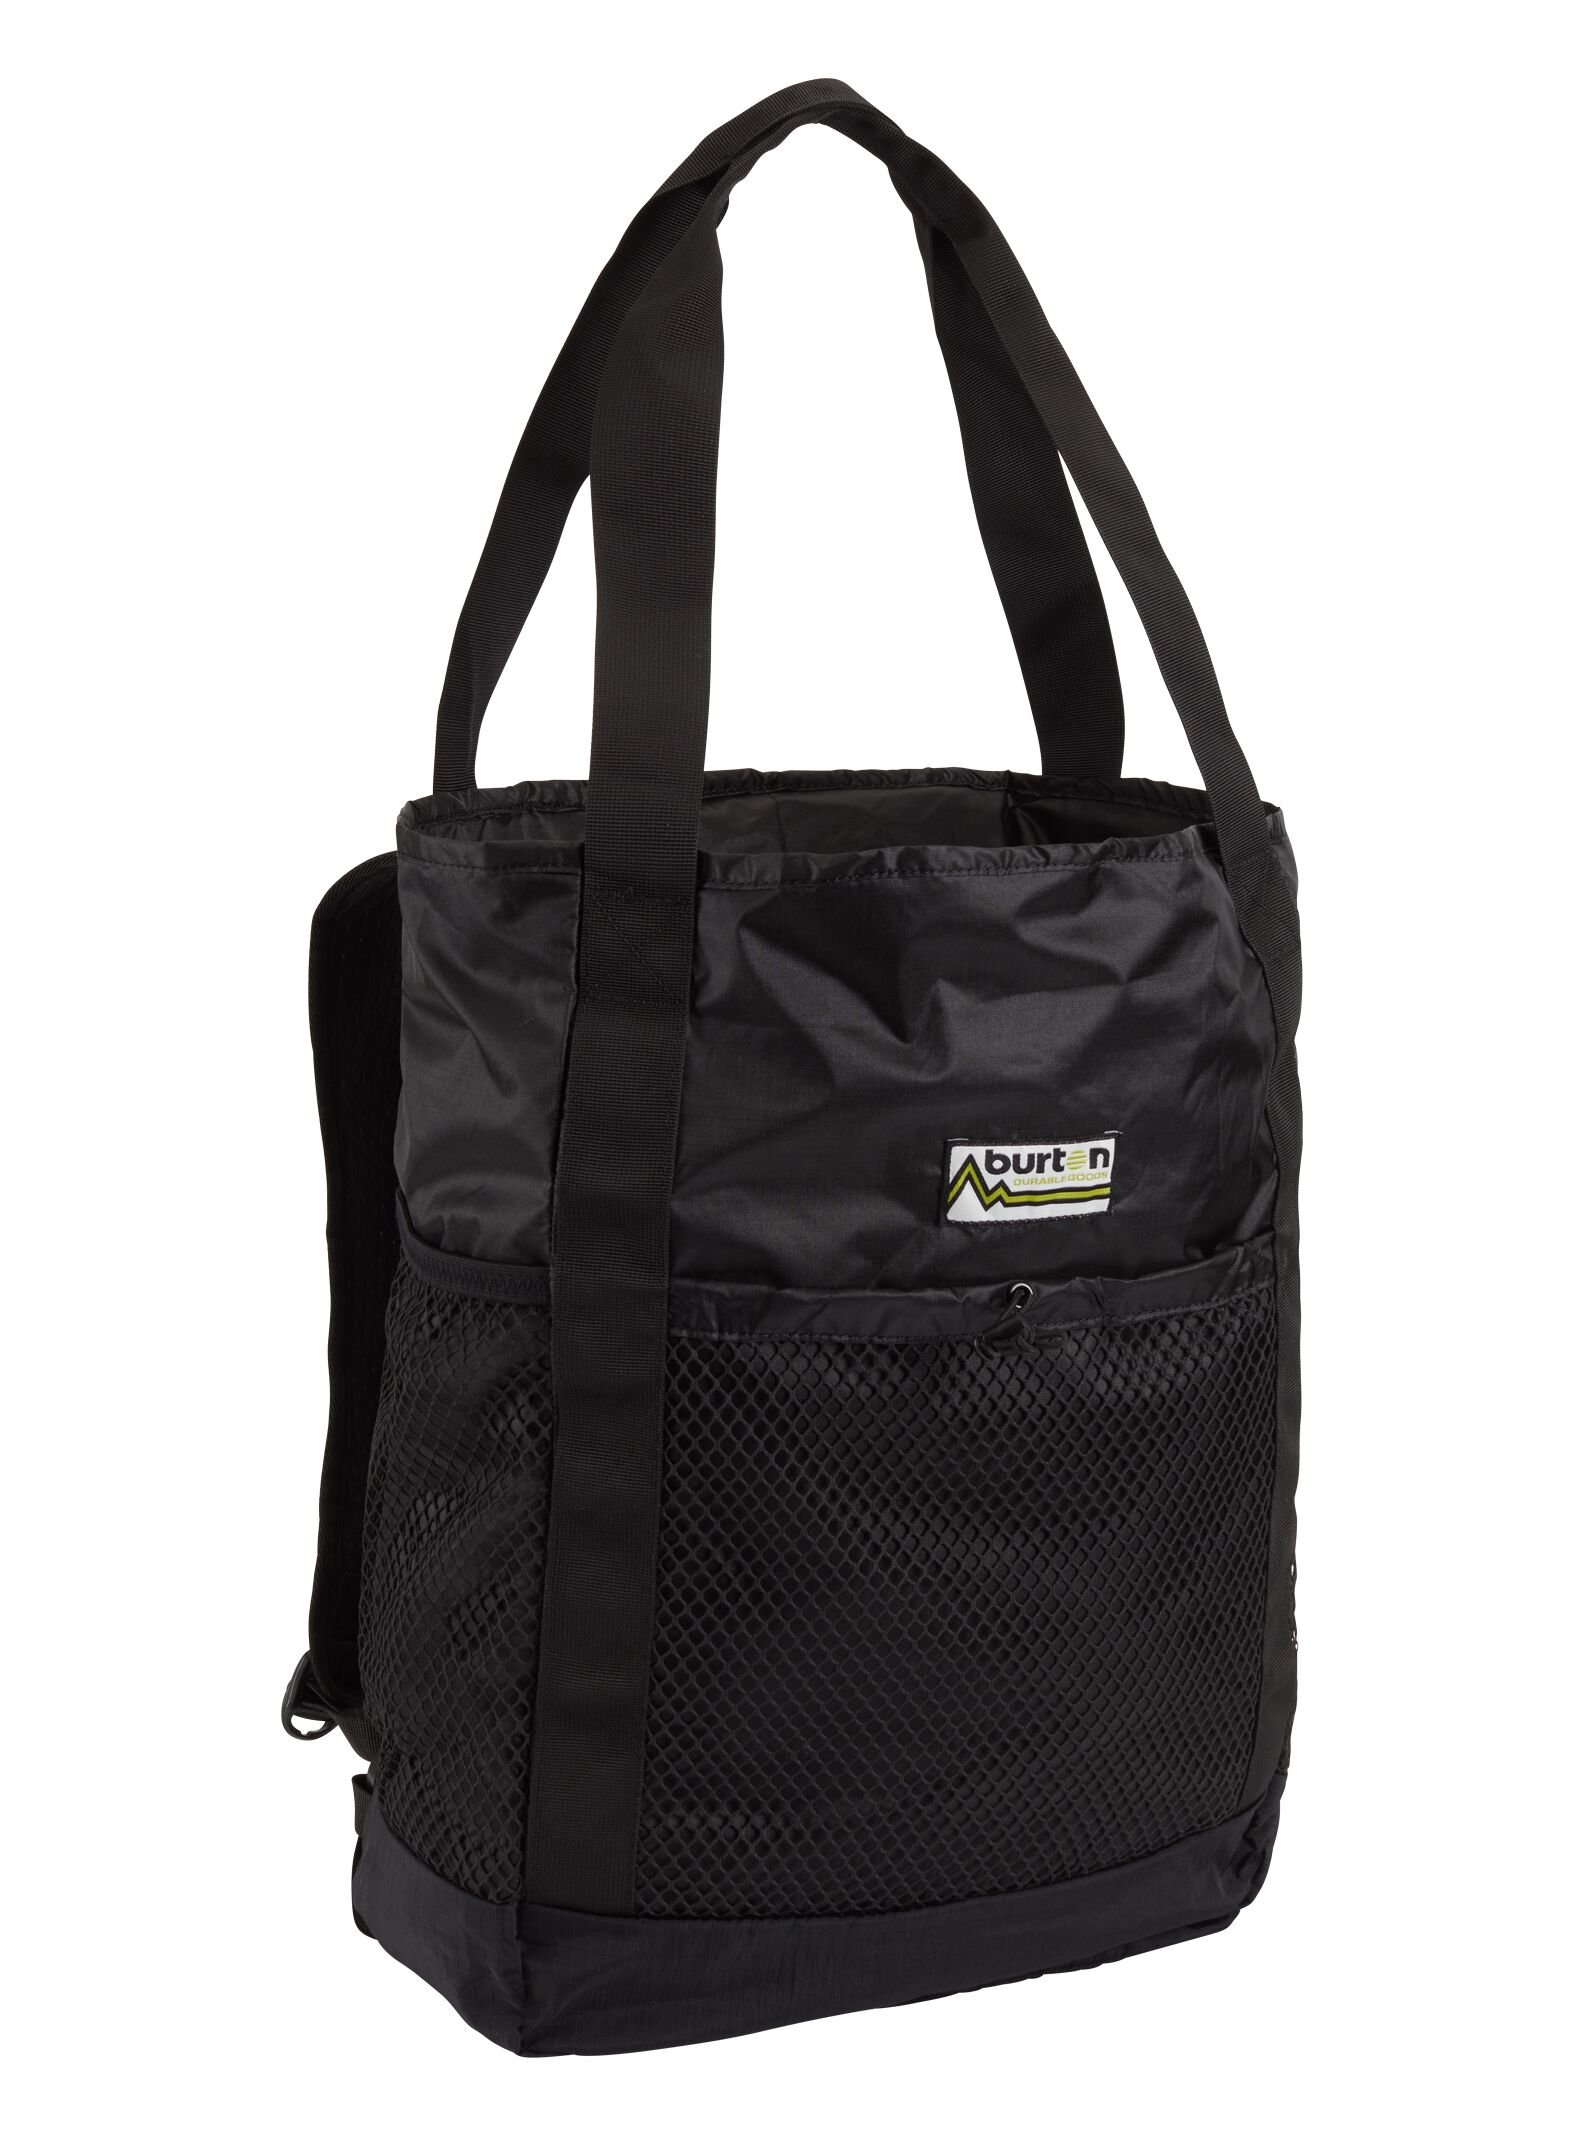 24L Packable Tote